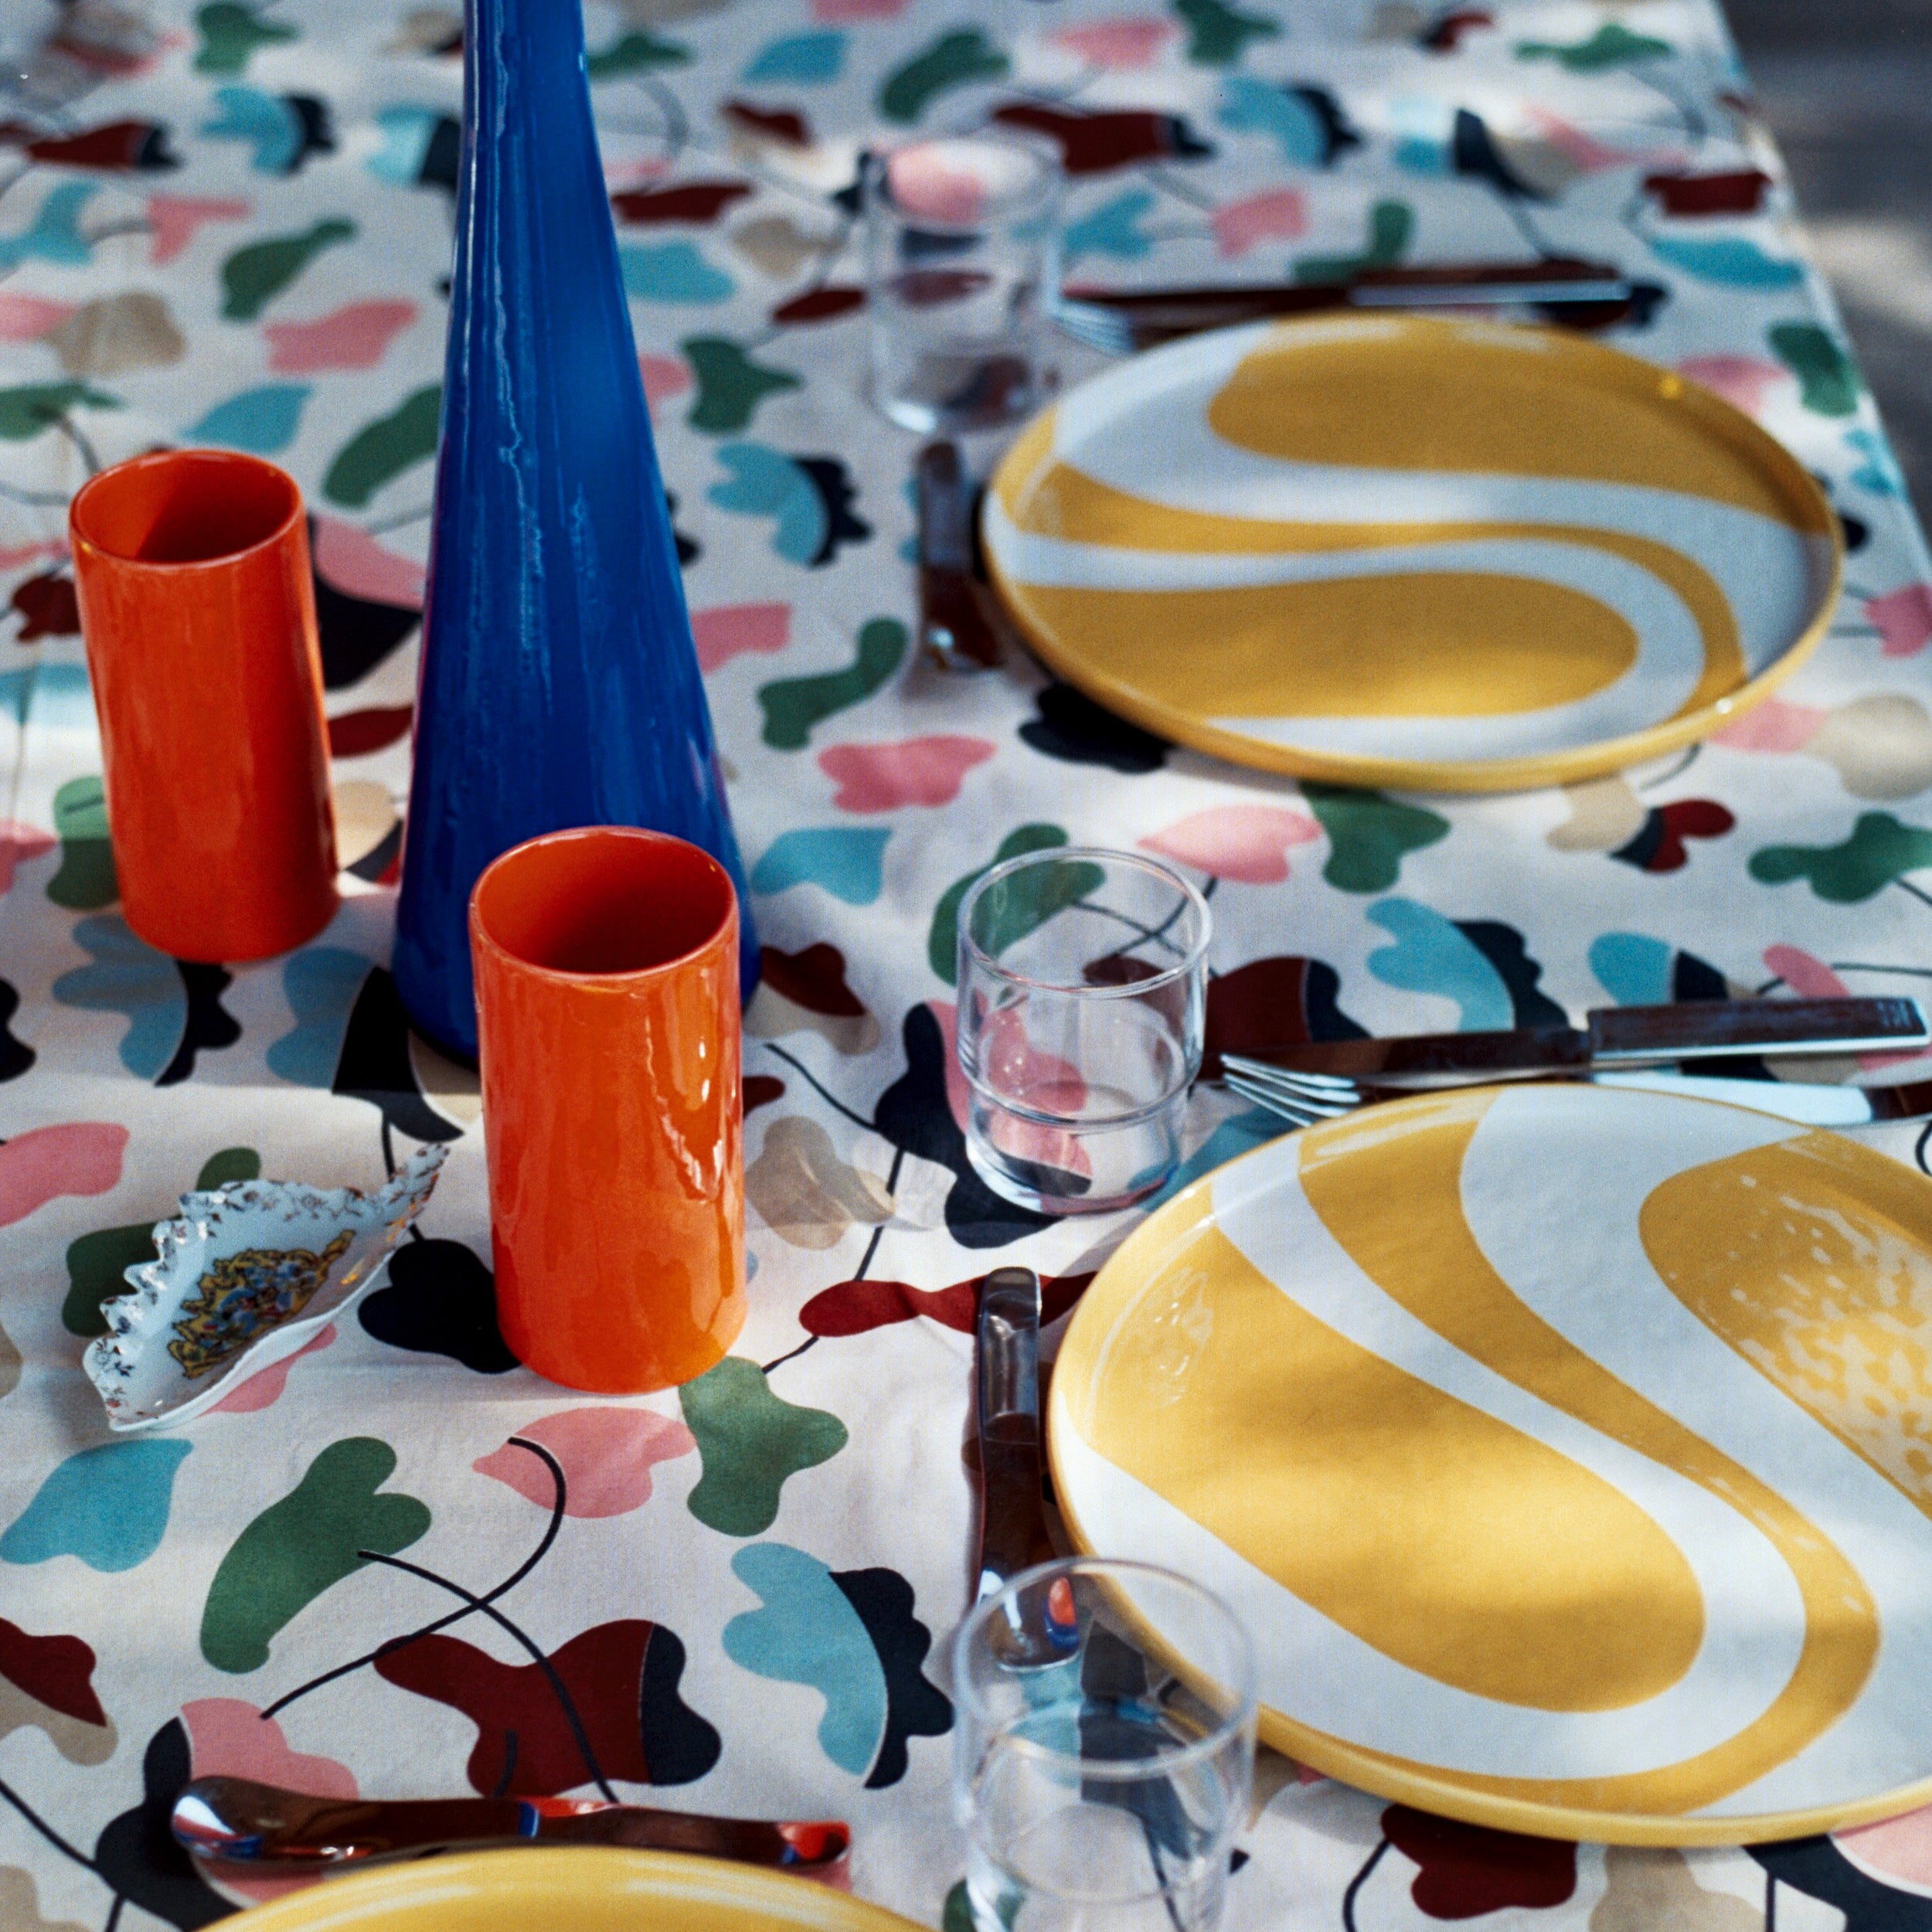 Hand screen printed cotton table cloth - Amoeba floral pattern